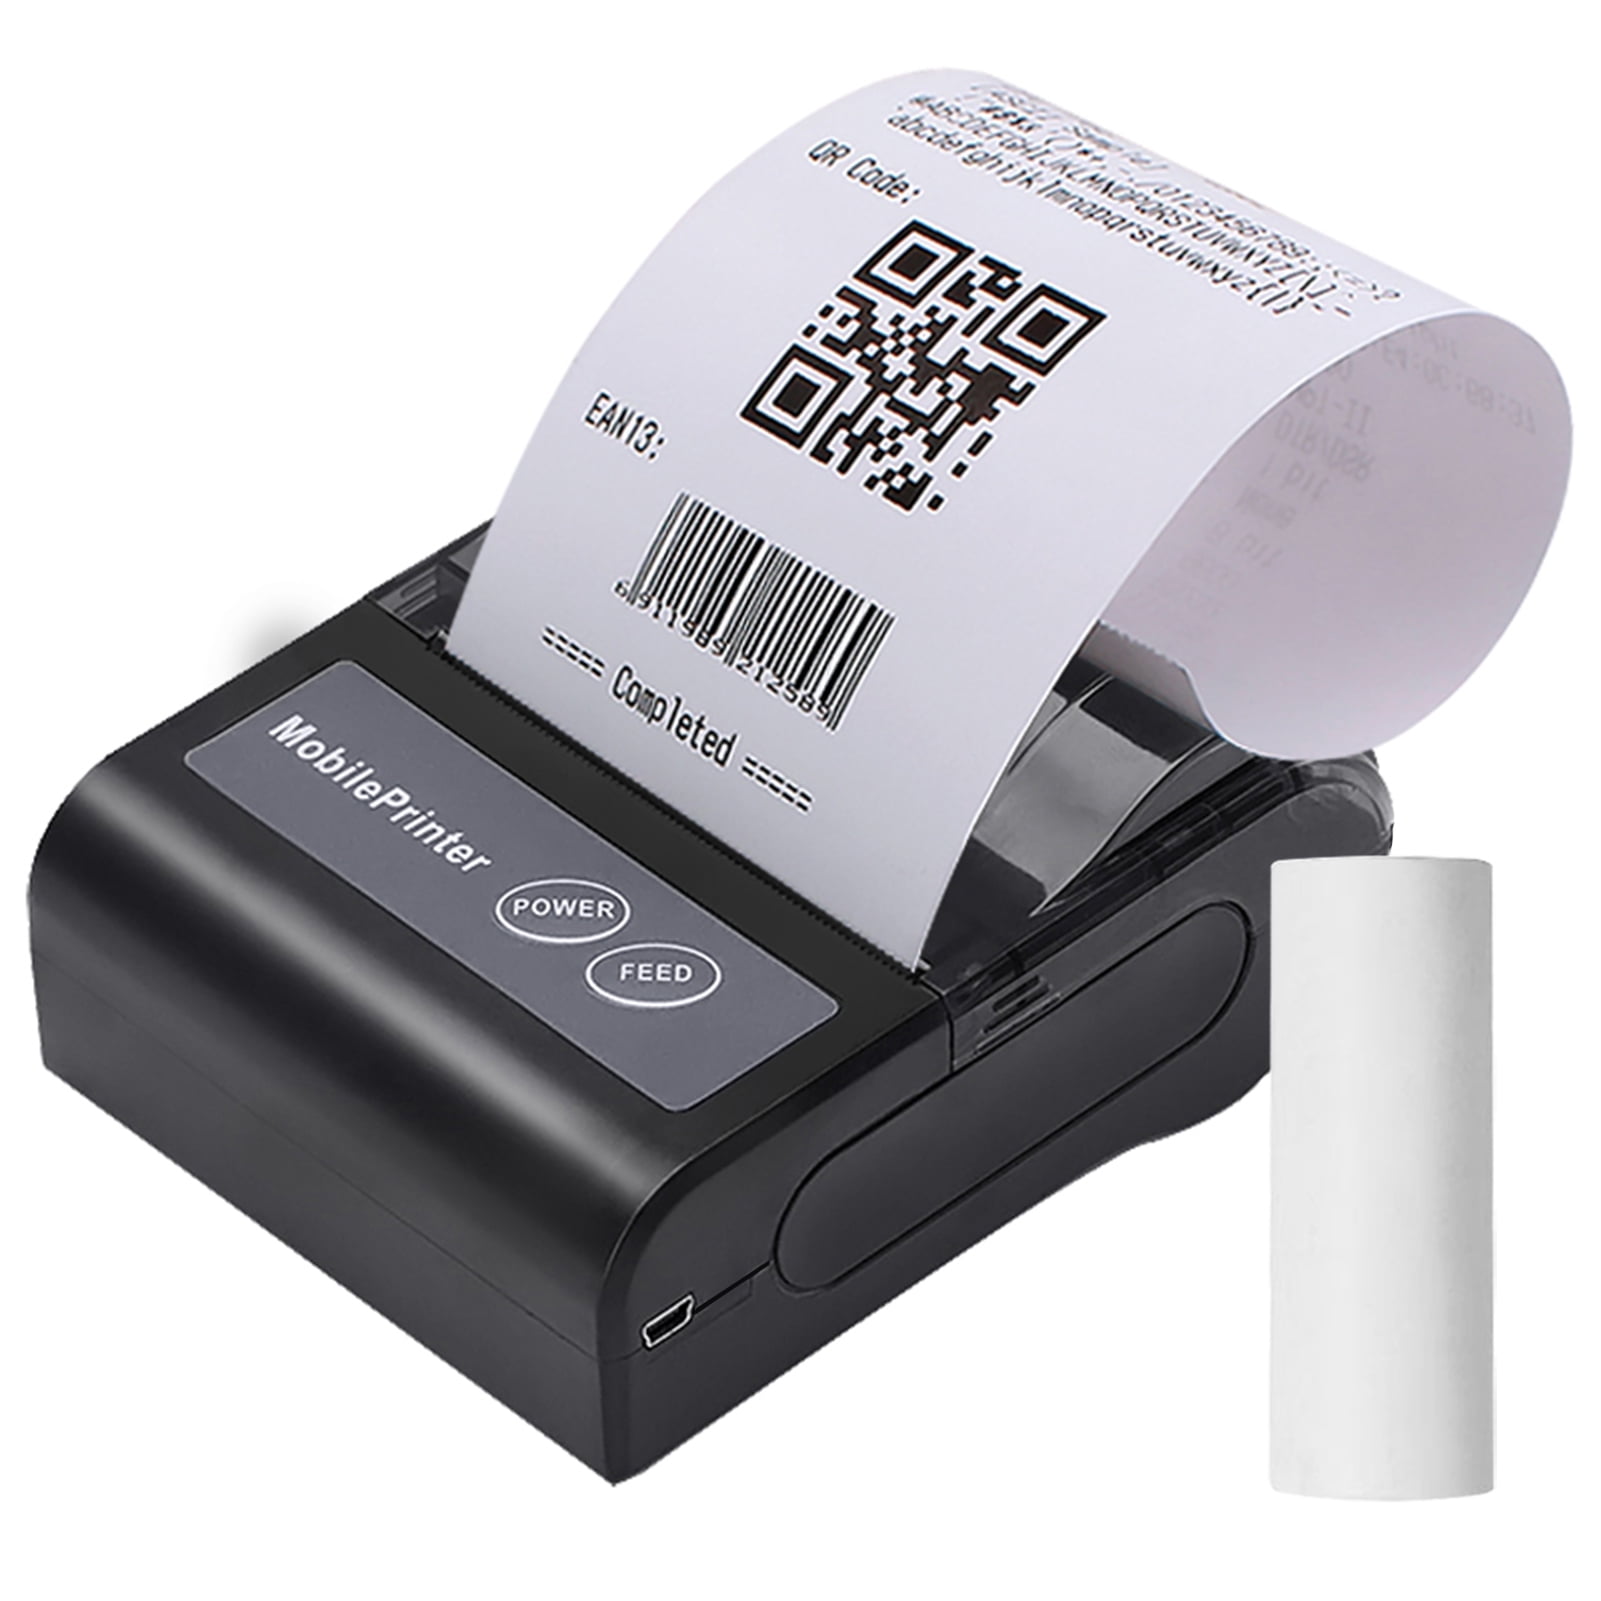 Portable BT 80mm Thermal Receipt Printer Mini Bill POS Mobile Printer with  Rechargeable Battery Support ESC/POS Compatible with Android iOS Windows  for Restaurant Supermarket Kitchen Office 